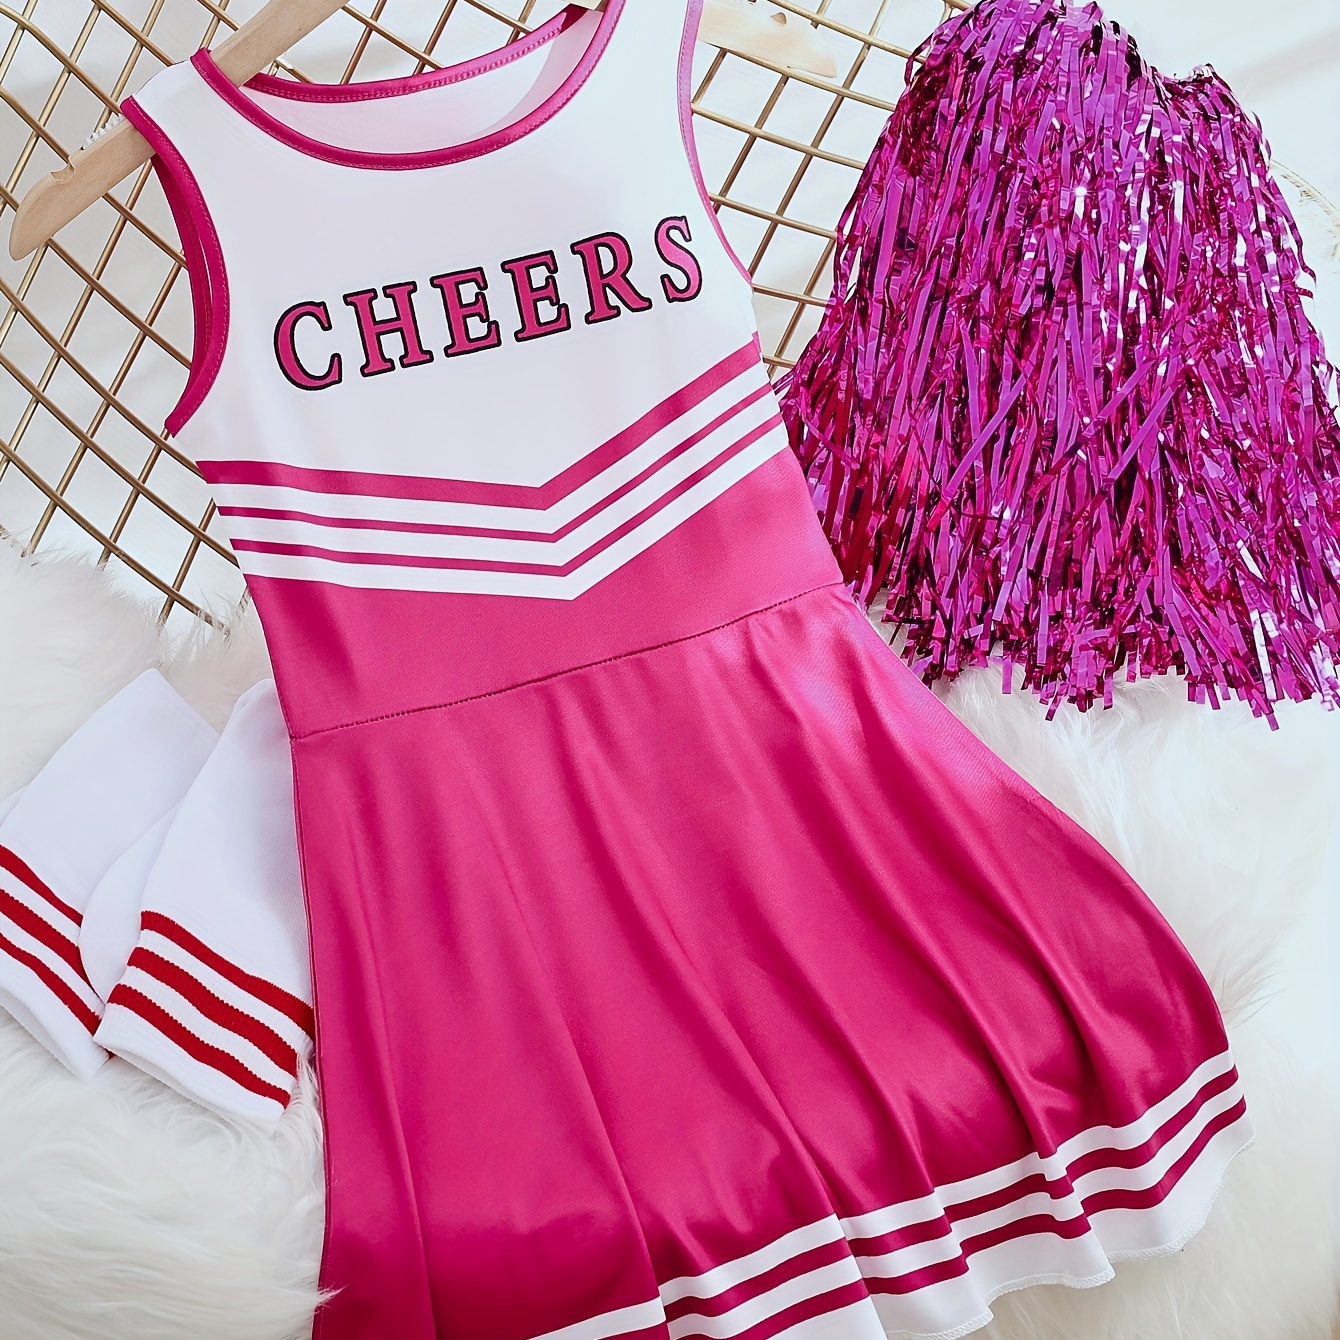 

Cheerleading Dress Cute Children's Performance Dress Girls' Party Clothing Available In Multiple Colors